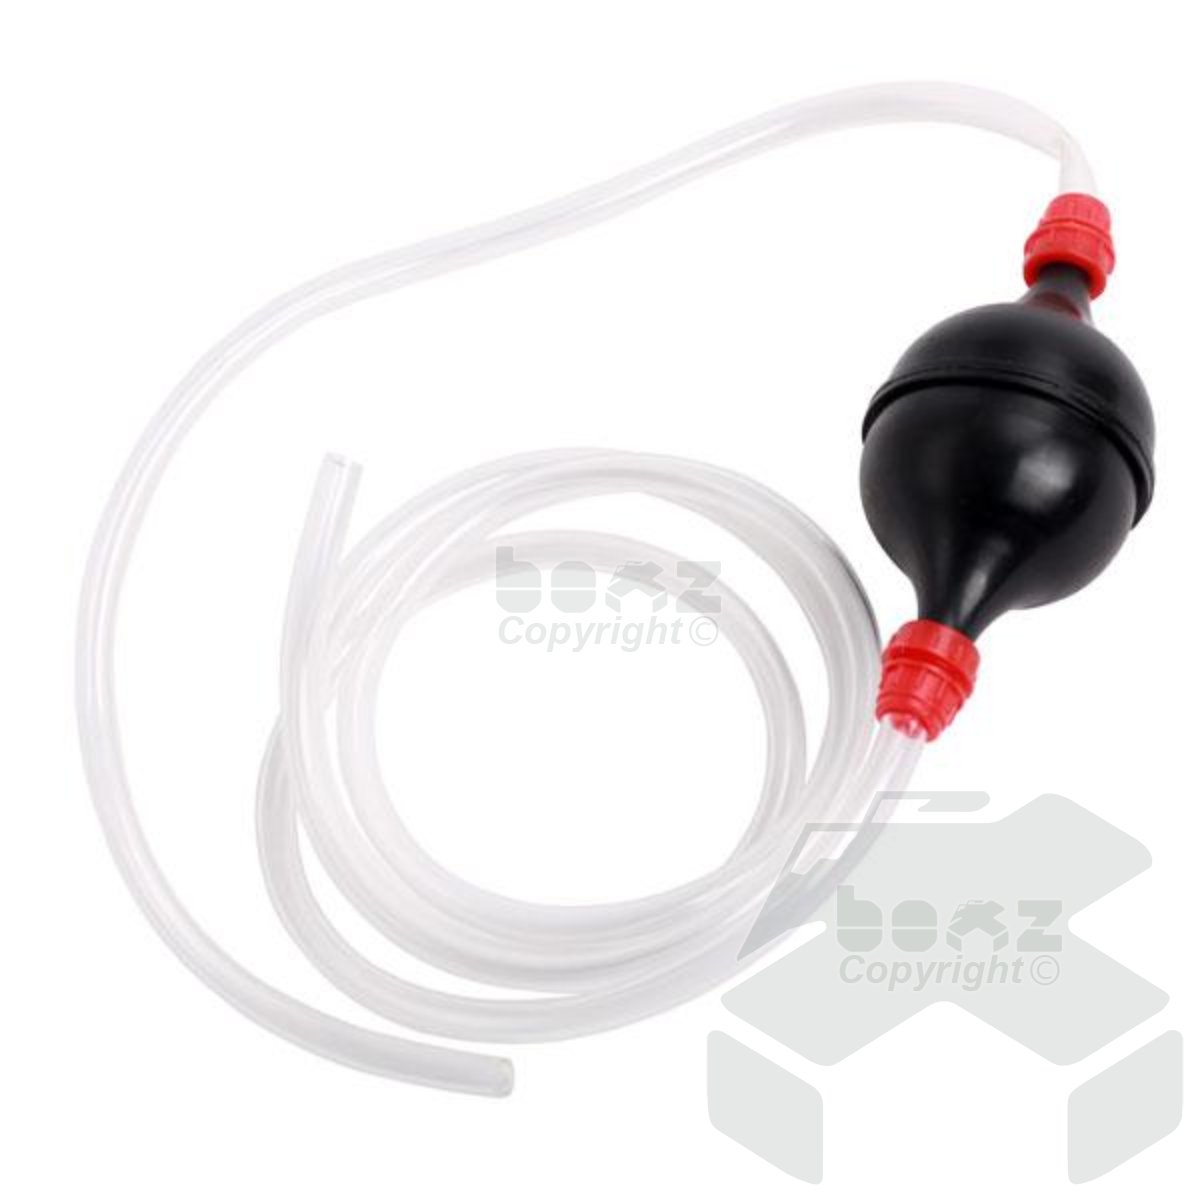 Rubber Ball Style Siphon Syphon Pump